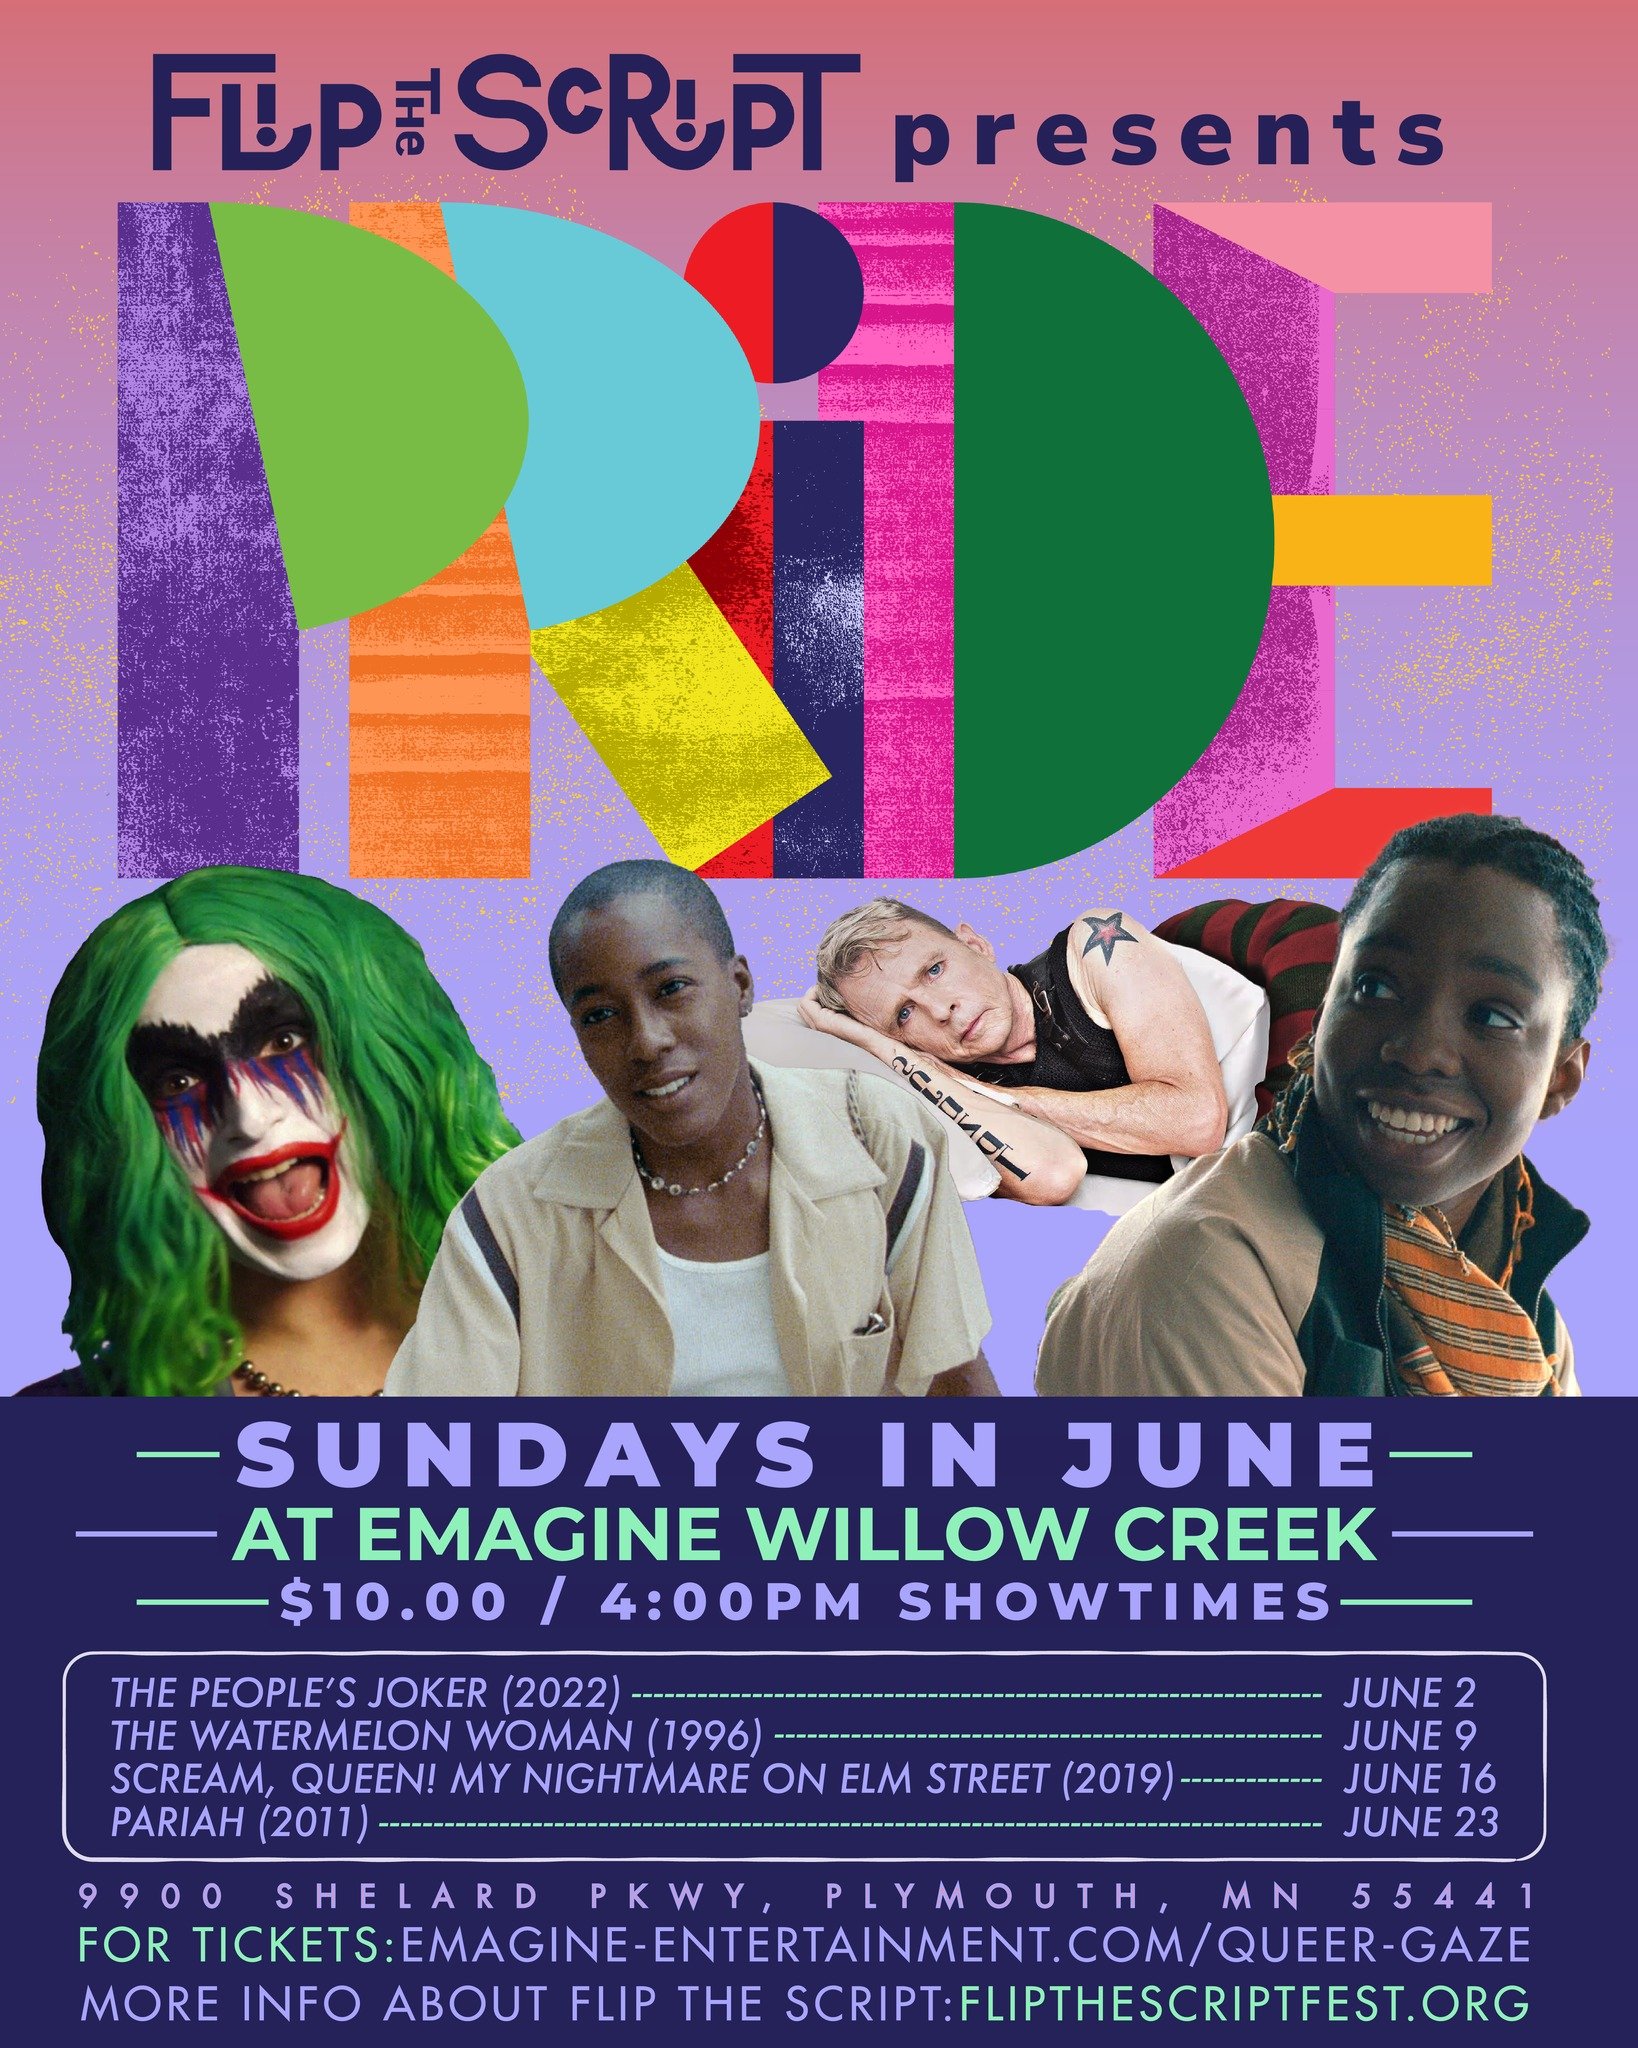 Join us for PRIDE at @emaginemn Willow Creek! We've got 4 films playing on Sunday evenings in June. Tickets are $10, all films start at 4:00PM. TICKETS ON SALE NOW! #linkinbio 💌

6/2 - THE PEOPLE'S JOKER
This revolutionary DIY parody film and hilari